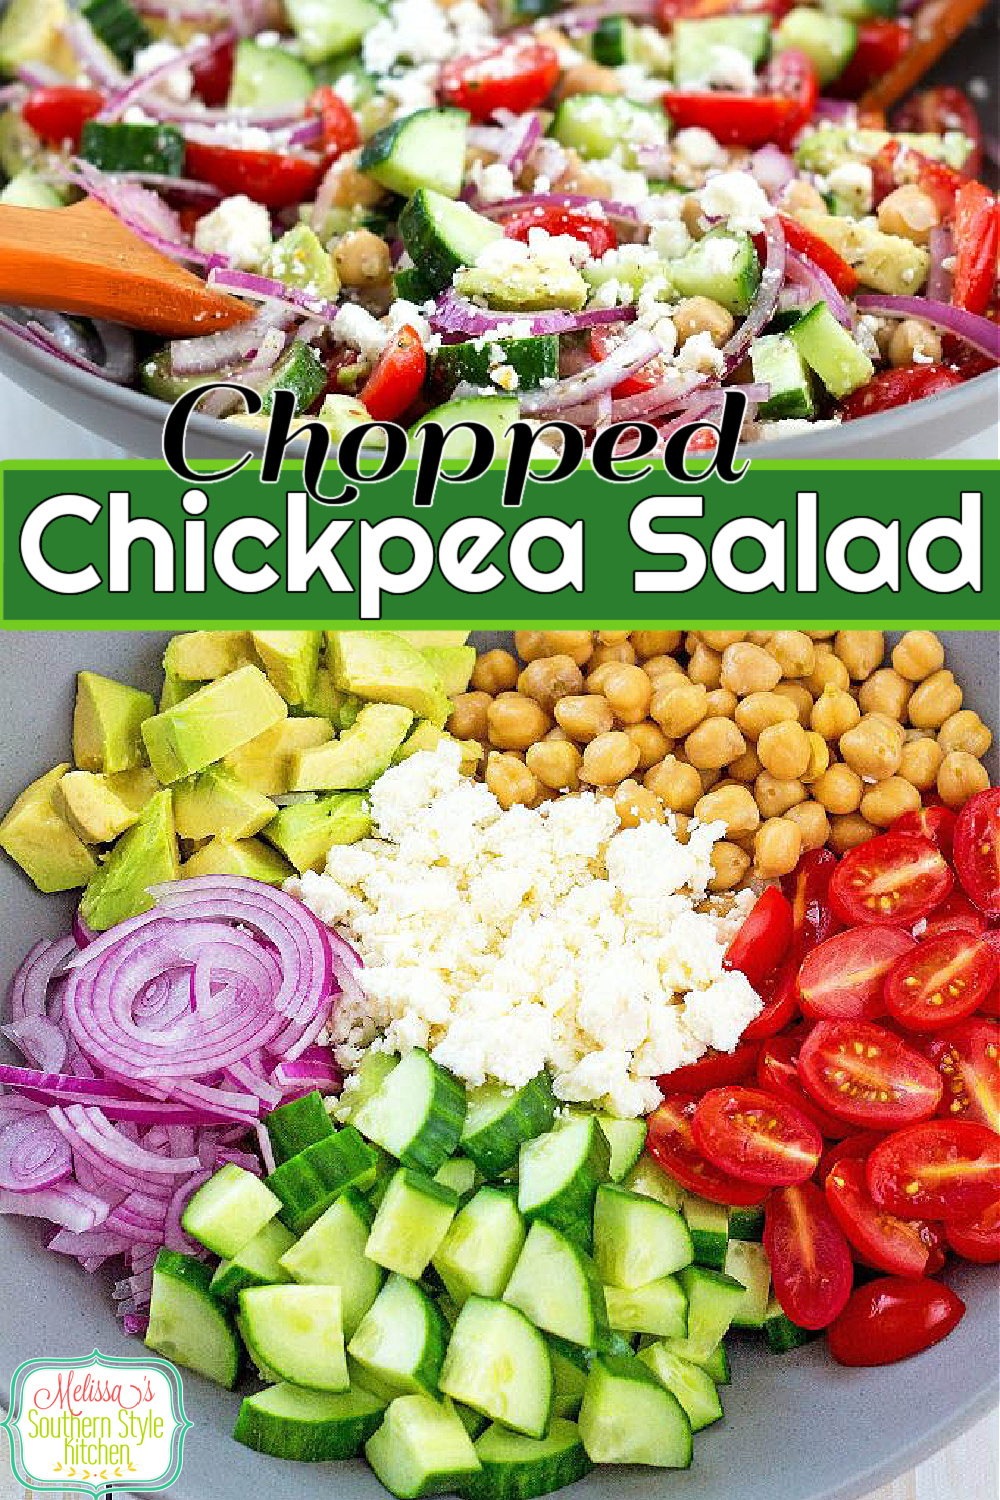 This fresh veggie filled Chopped Chickpea Salad with Avocado can be served as side dish or a light meal. #chickpeas #chickpeasalad #saladrecipes #healthysalads #healthyrecipes #vegetarian #avocadorecipes #southernsides #southernrecipes #picnicsides via @melissasssk